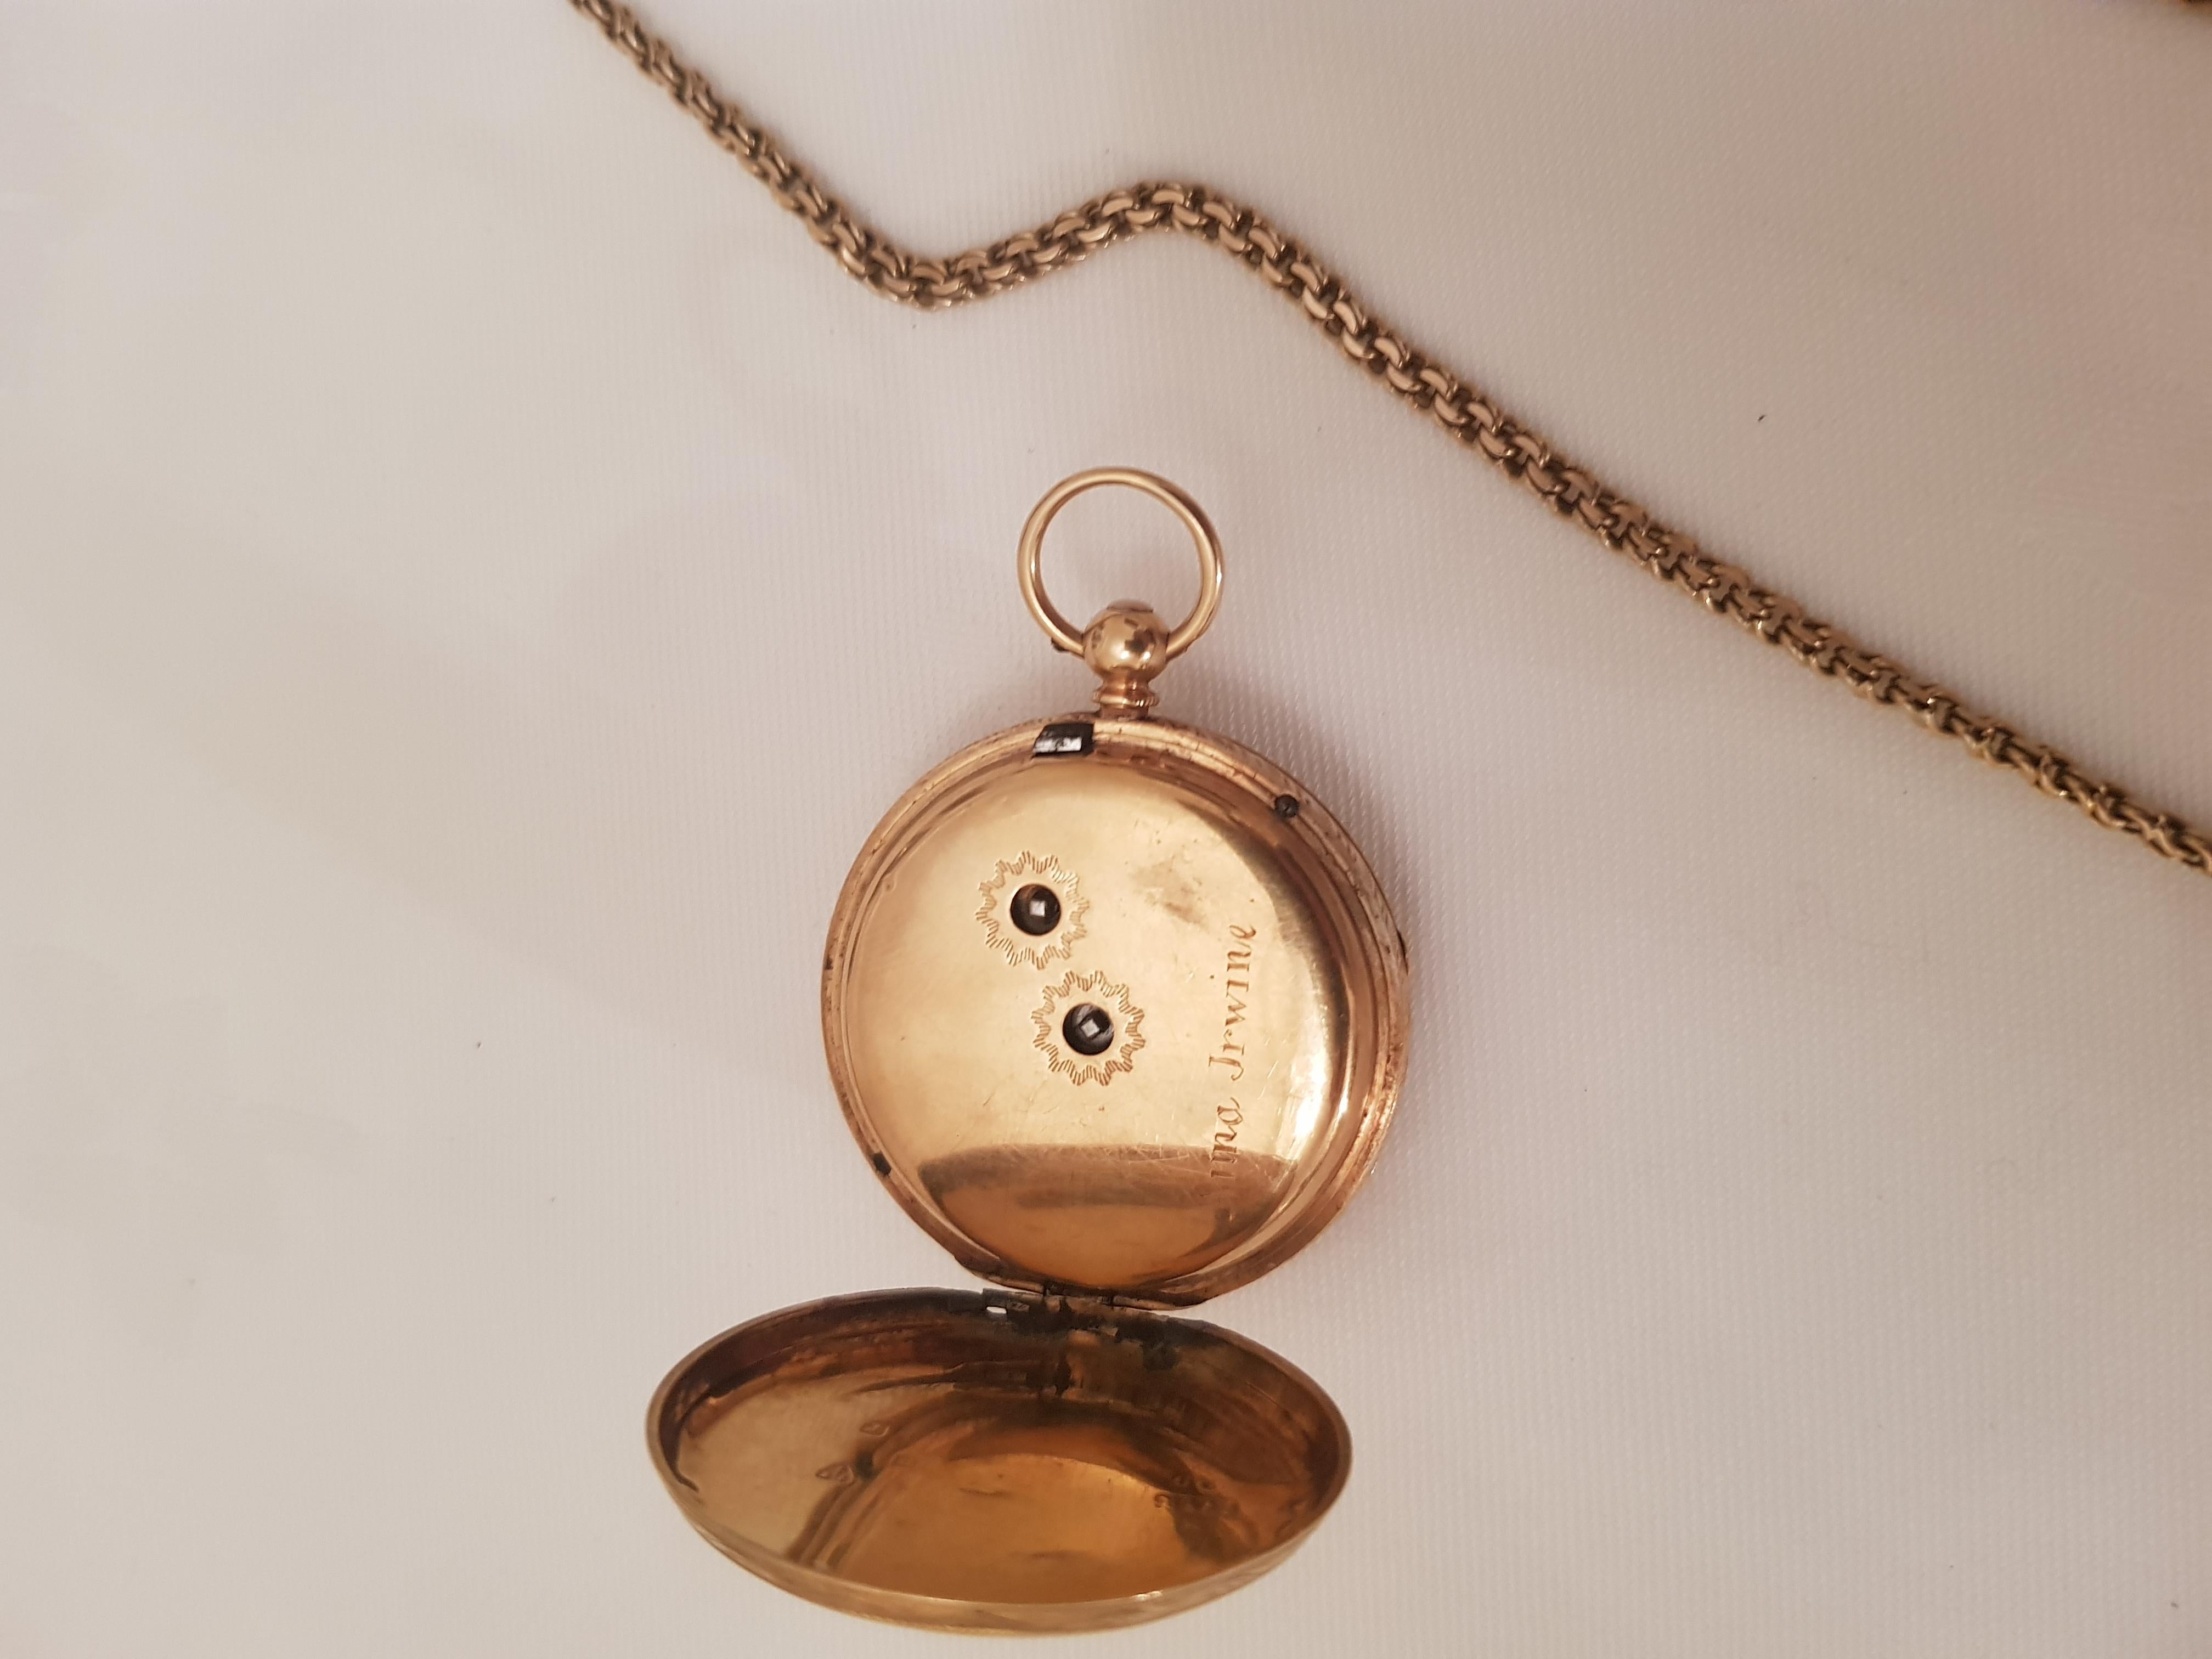 Victorian 18-Karat Gold Watch with Exceptional 10 Karat Gold Associated Chain In Good Condition For Sale In Dromod, Co. Leitrim